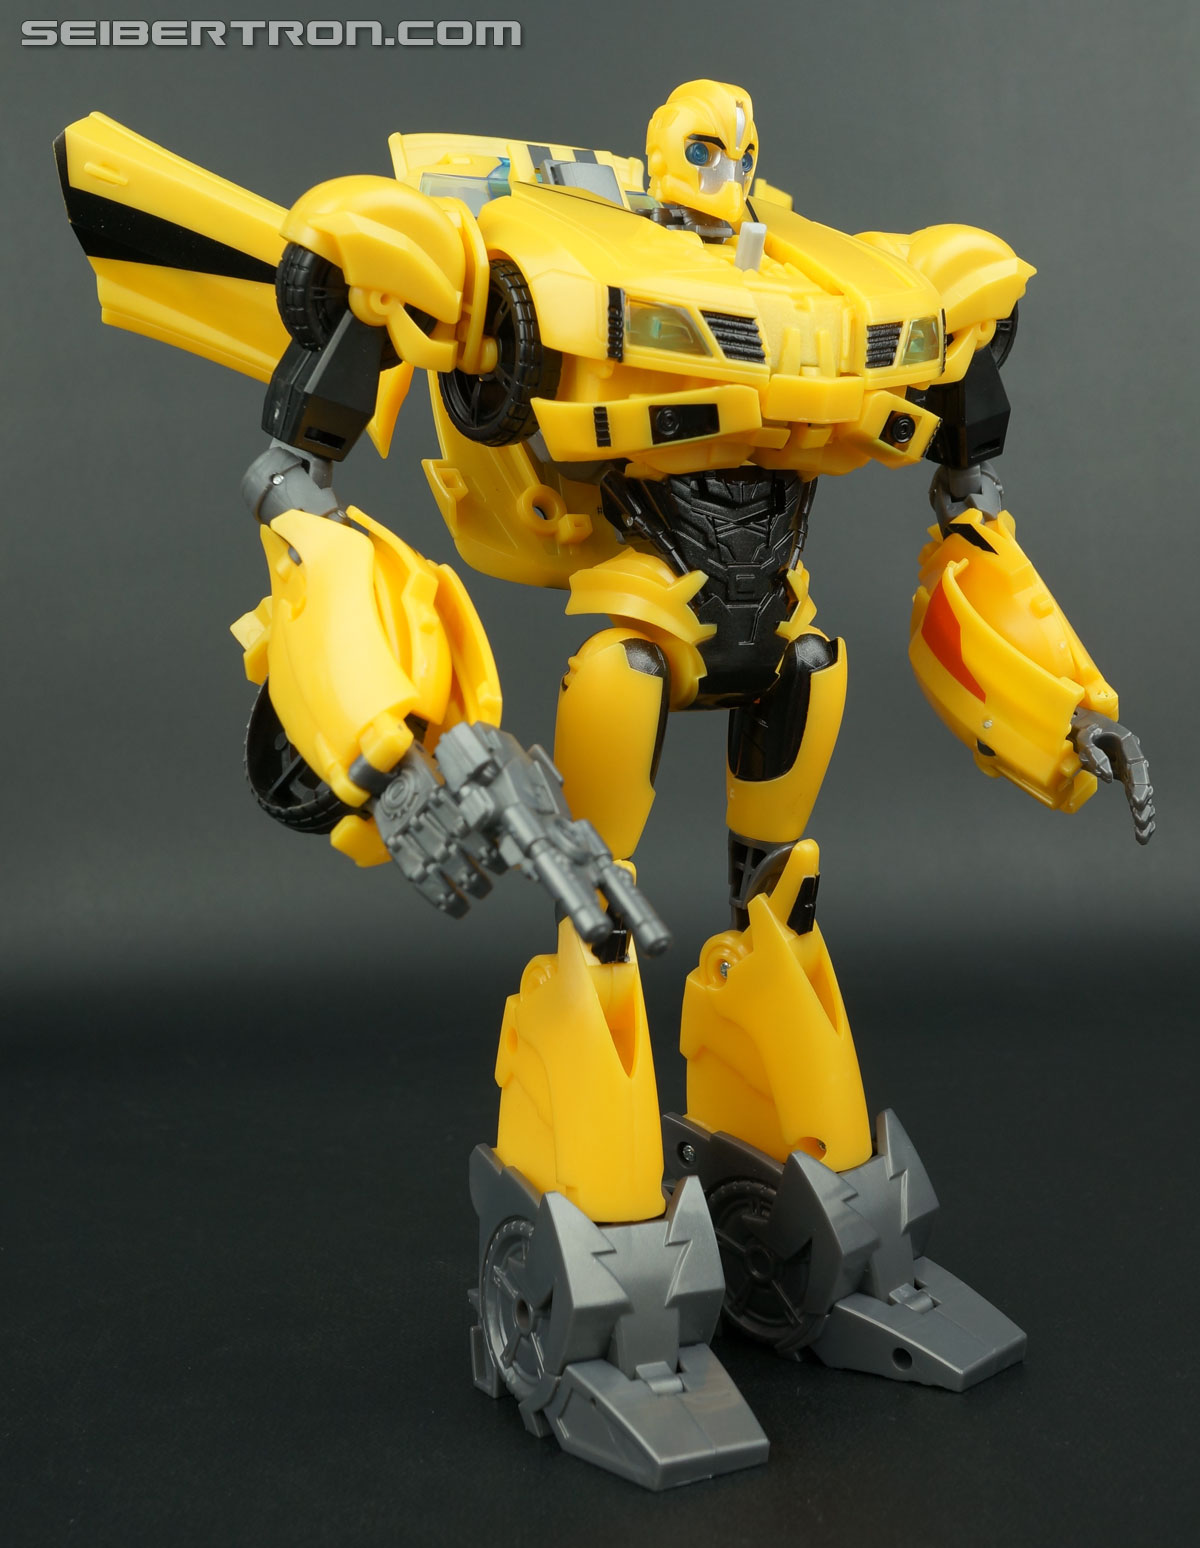 Transformers Prime: Robots In Disguise Bumblebee (Image #58 of 164)